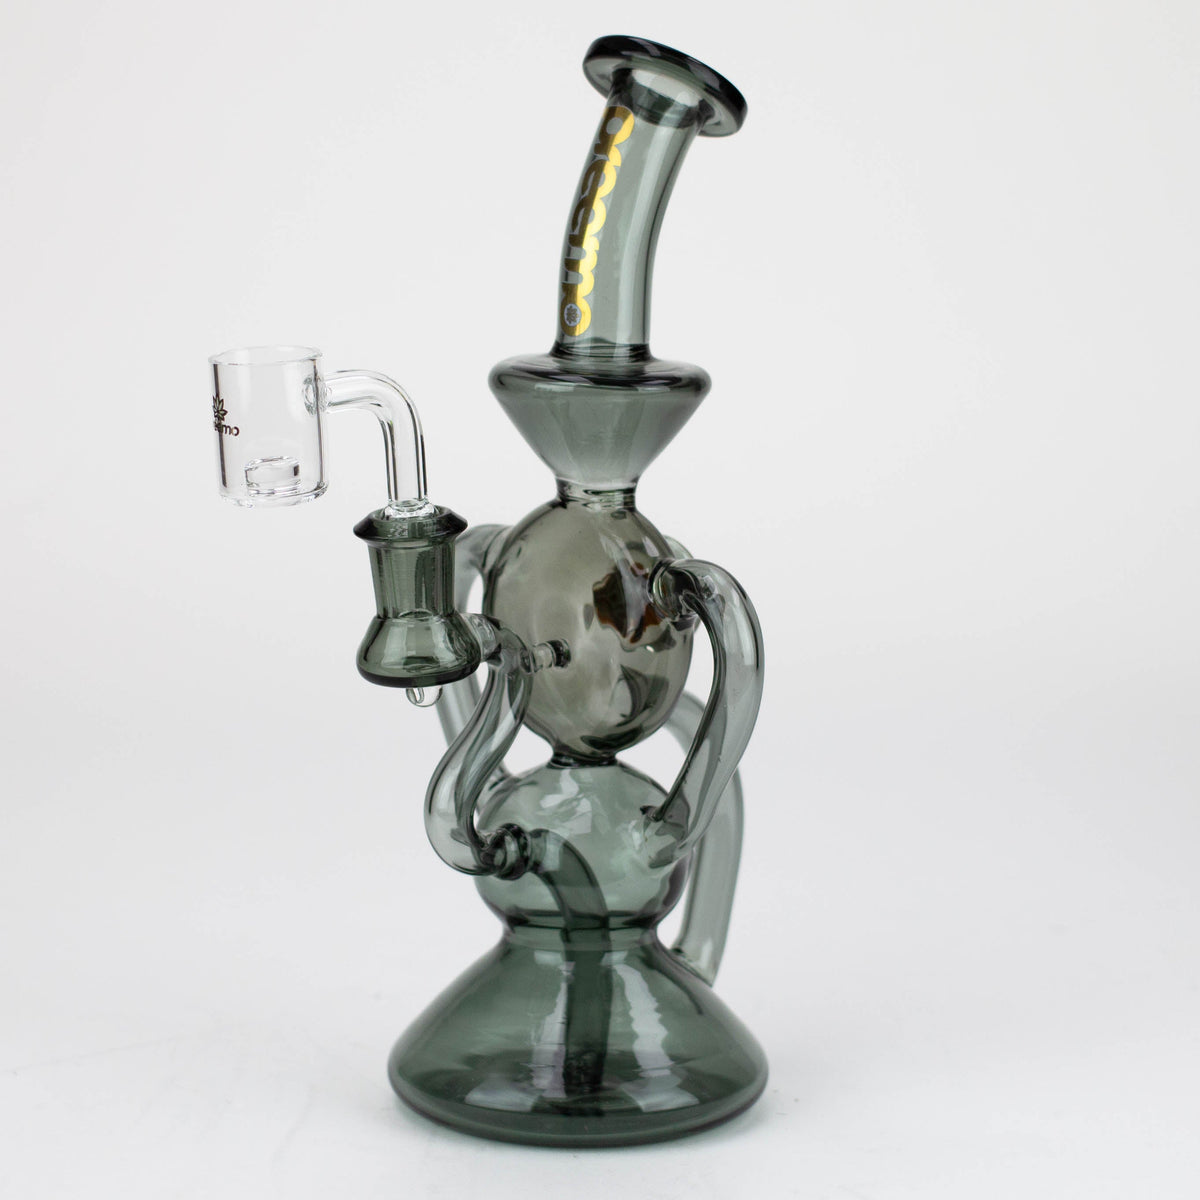 Preemo 11" 14mm glass Implosion Recycler dab Rig with a banger